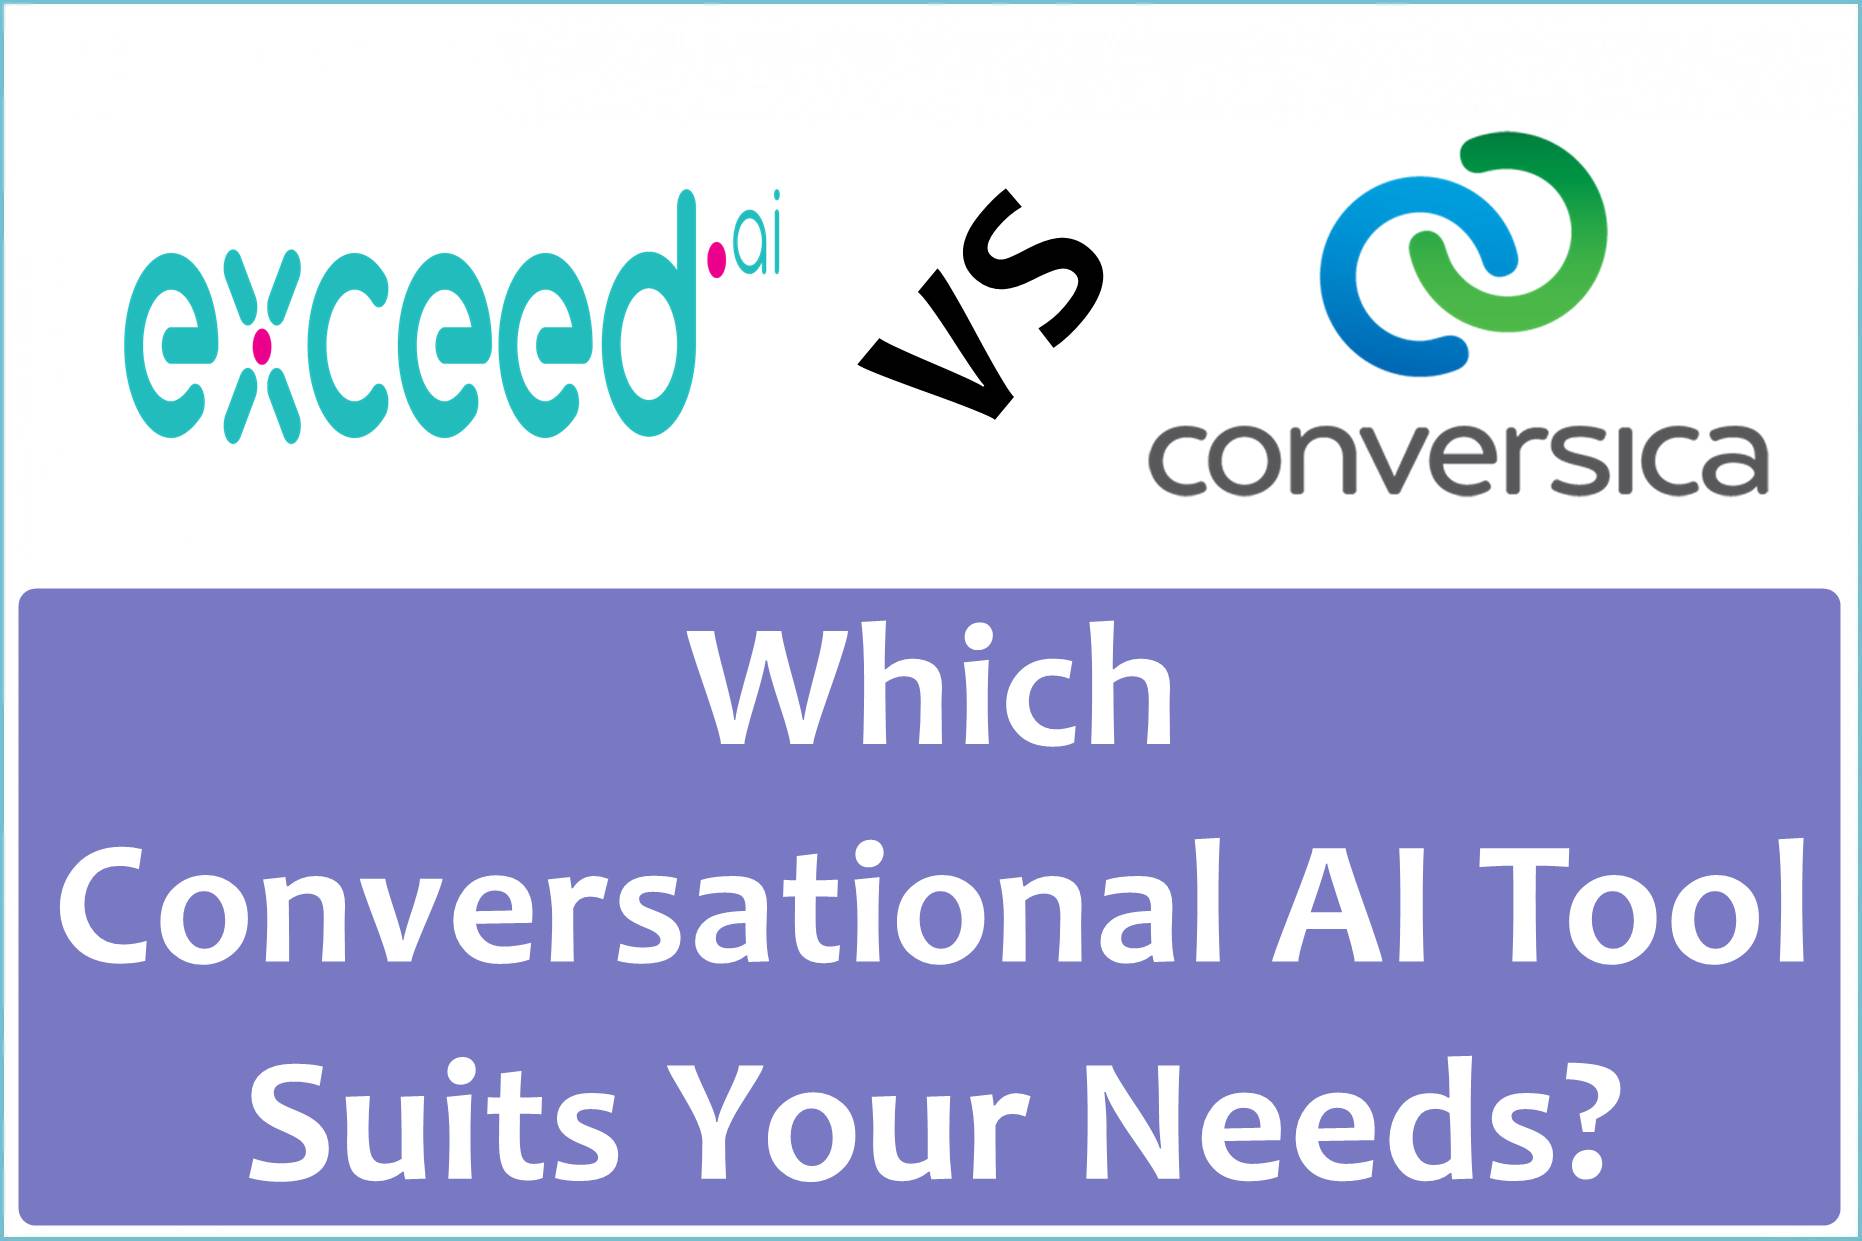 Exceed.ai vs. Conversica: Which Conversational AI Tool Suits Your Needs?